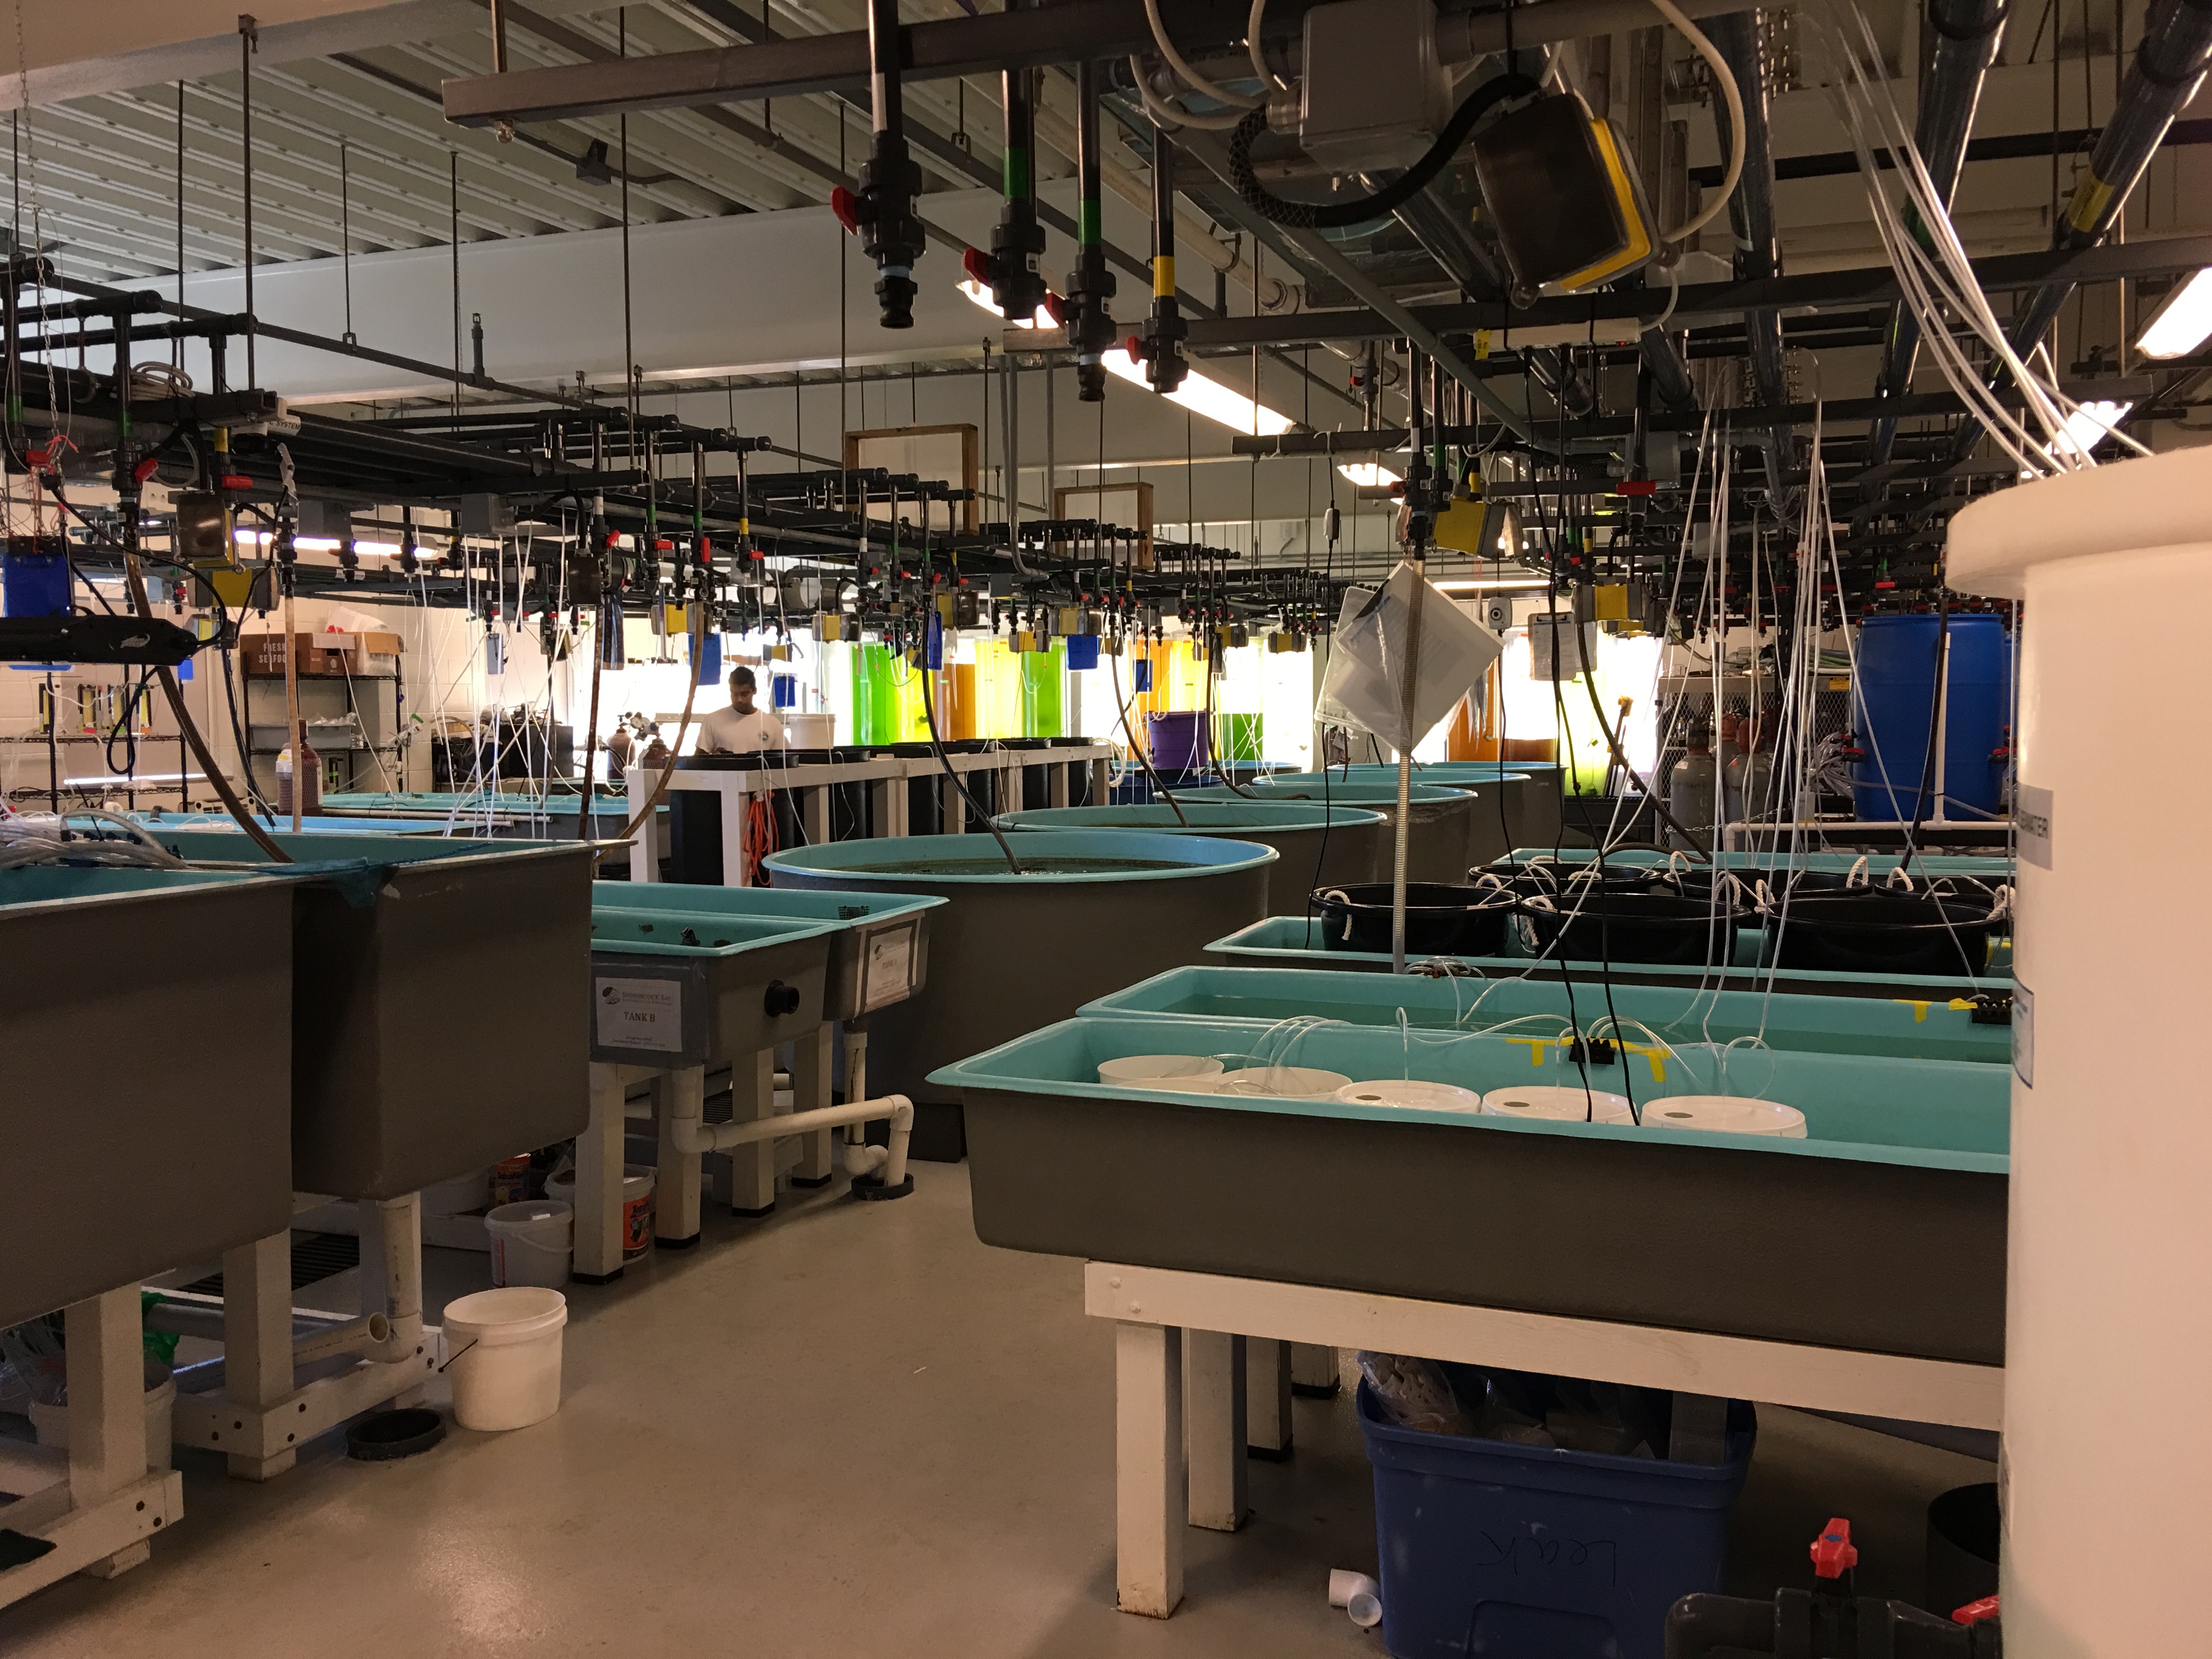 Inside the wet lab at the marine station, sea tables, pvc pipes, algae tubes